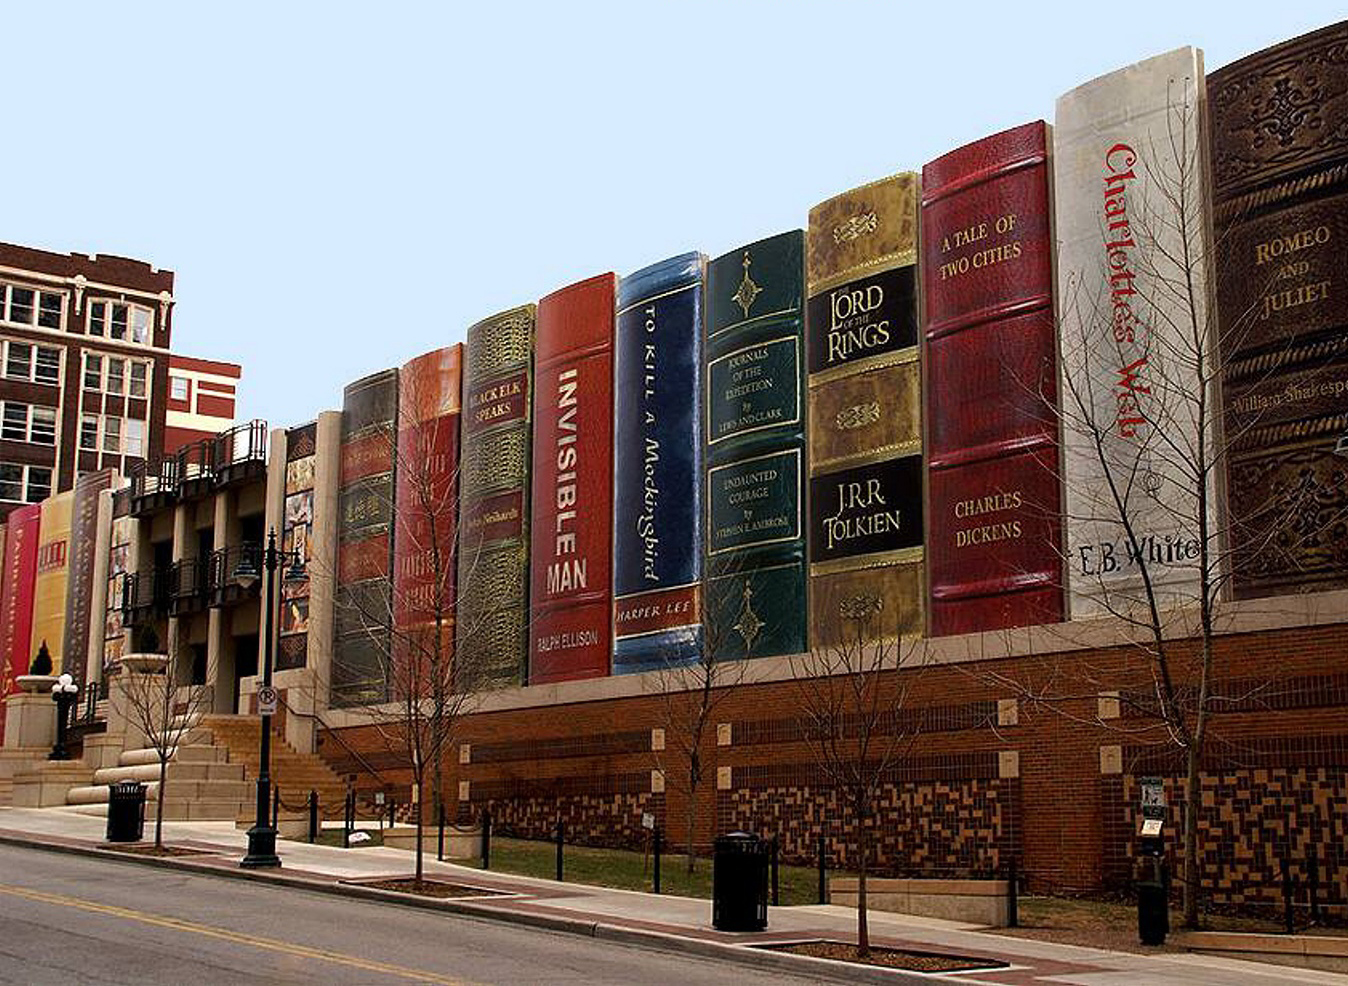 Hobbies and hobbies: Interesting places around the world- Kansas City Public Library